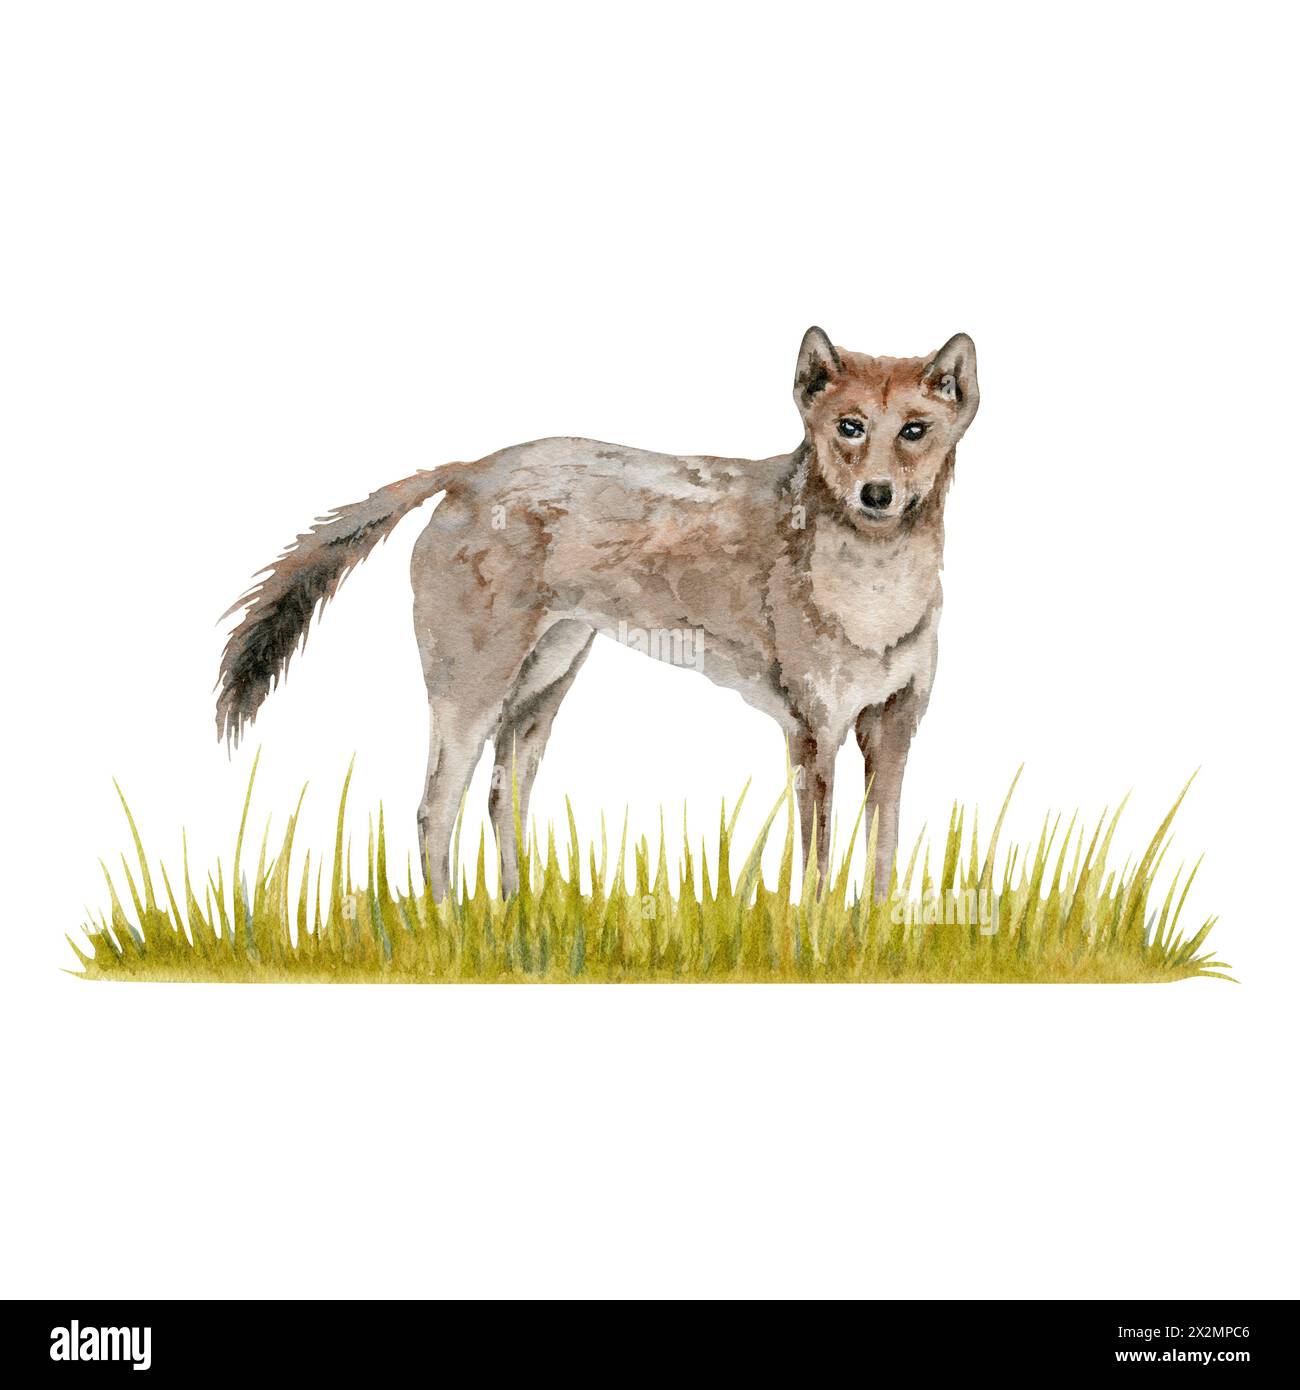 Dingo wild dog on a strip of grass composition. Watercolor illustration isolated on white background. Hand drawn Australian animal for cards designs Stock Photo